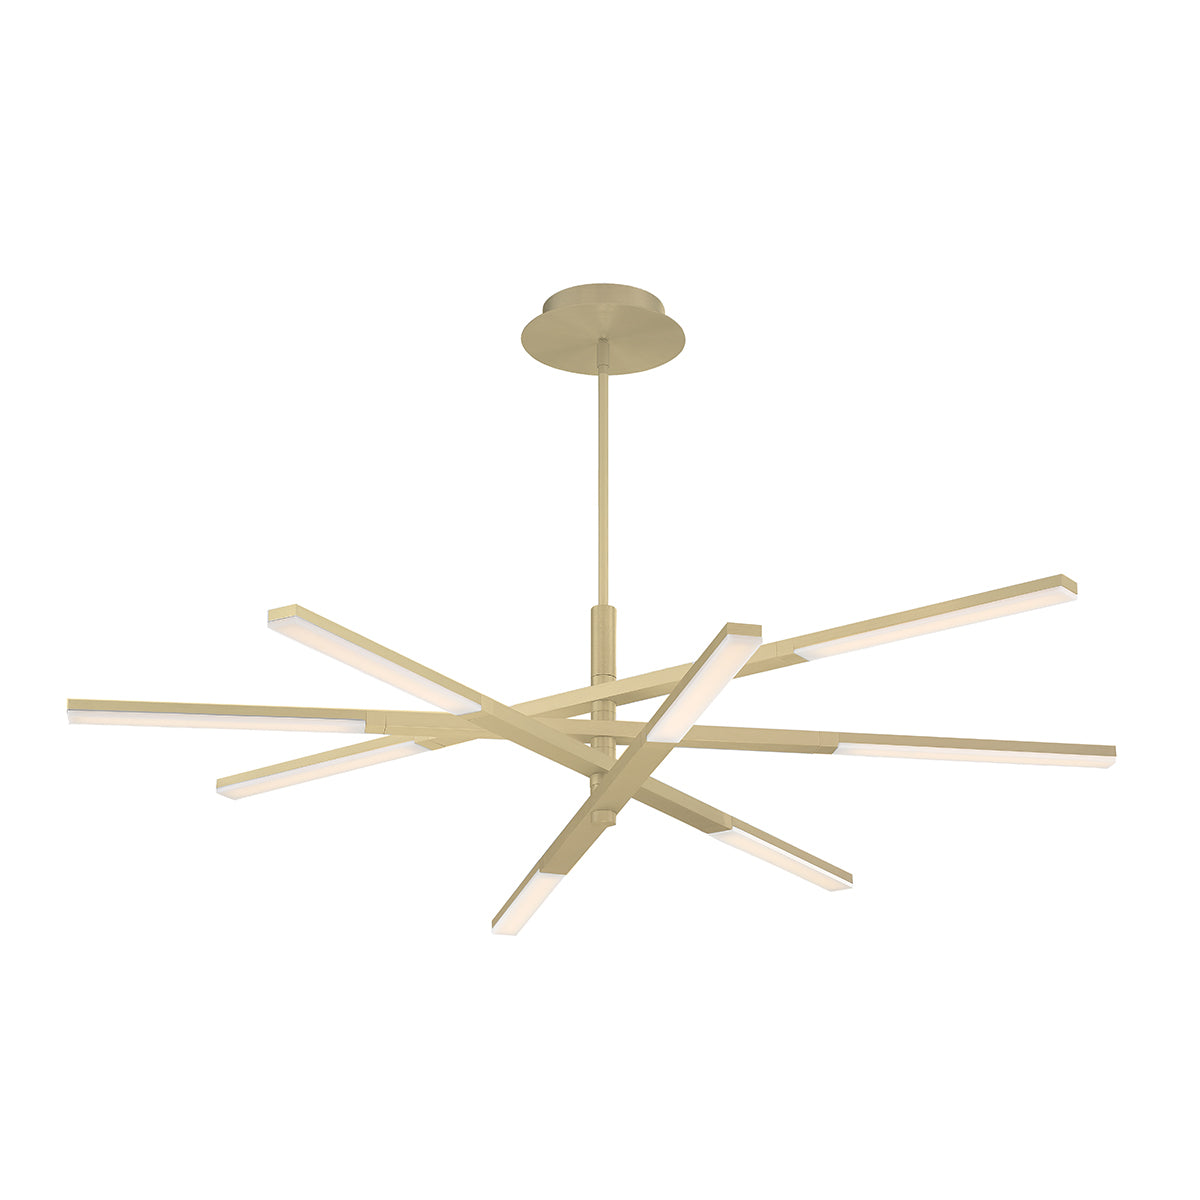 Modern Forms Canada - LED Chandelier - Stacked - Brushed Brass- Union Lighting Luminaires Decor